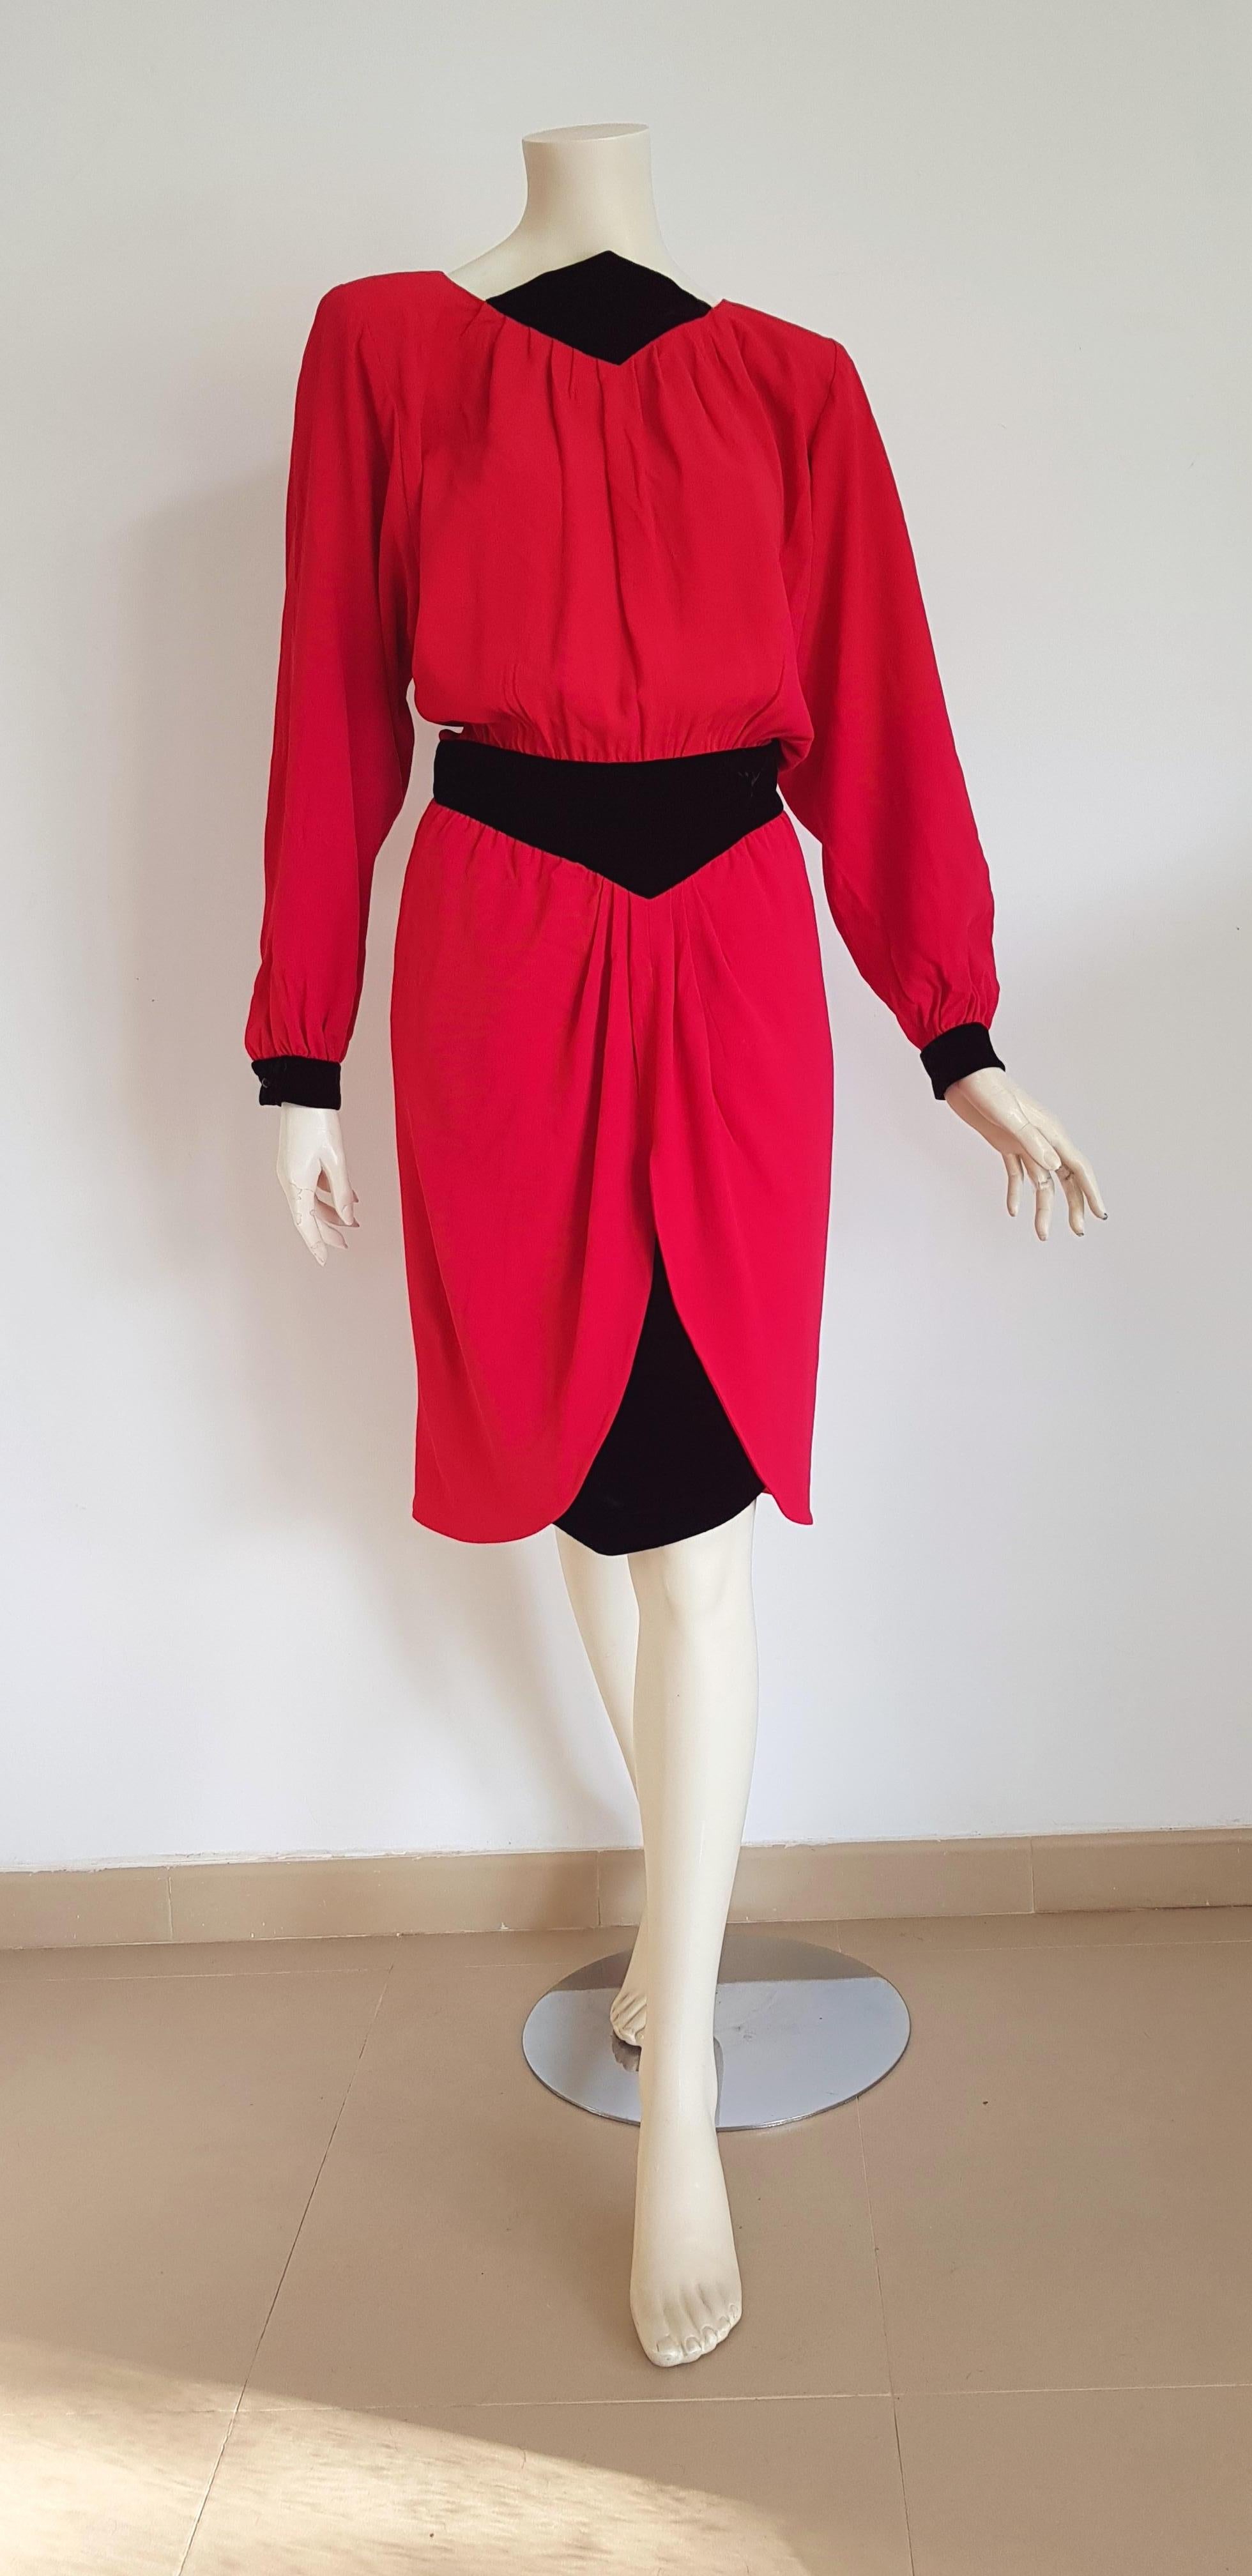 VALENTINO black Velvet Waistband Collar and Cuffs, Silk Red Dress - Unworn, New.

SIZE: equivalent to about Small / Medium, please review approx measurements as follows in cm: lenght 101, chest underarm to underarm 55, bust circumference 92,